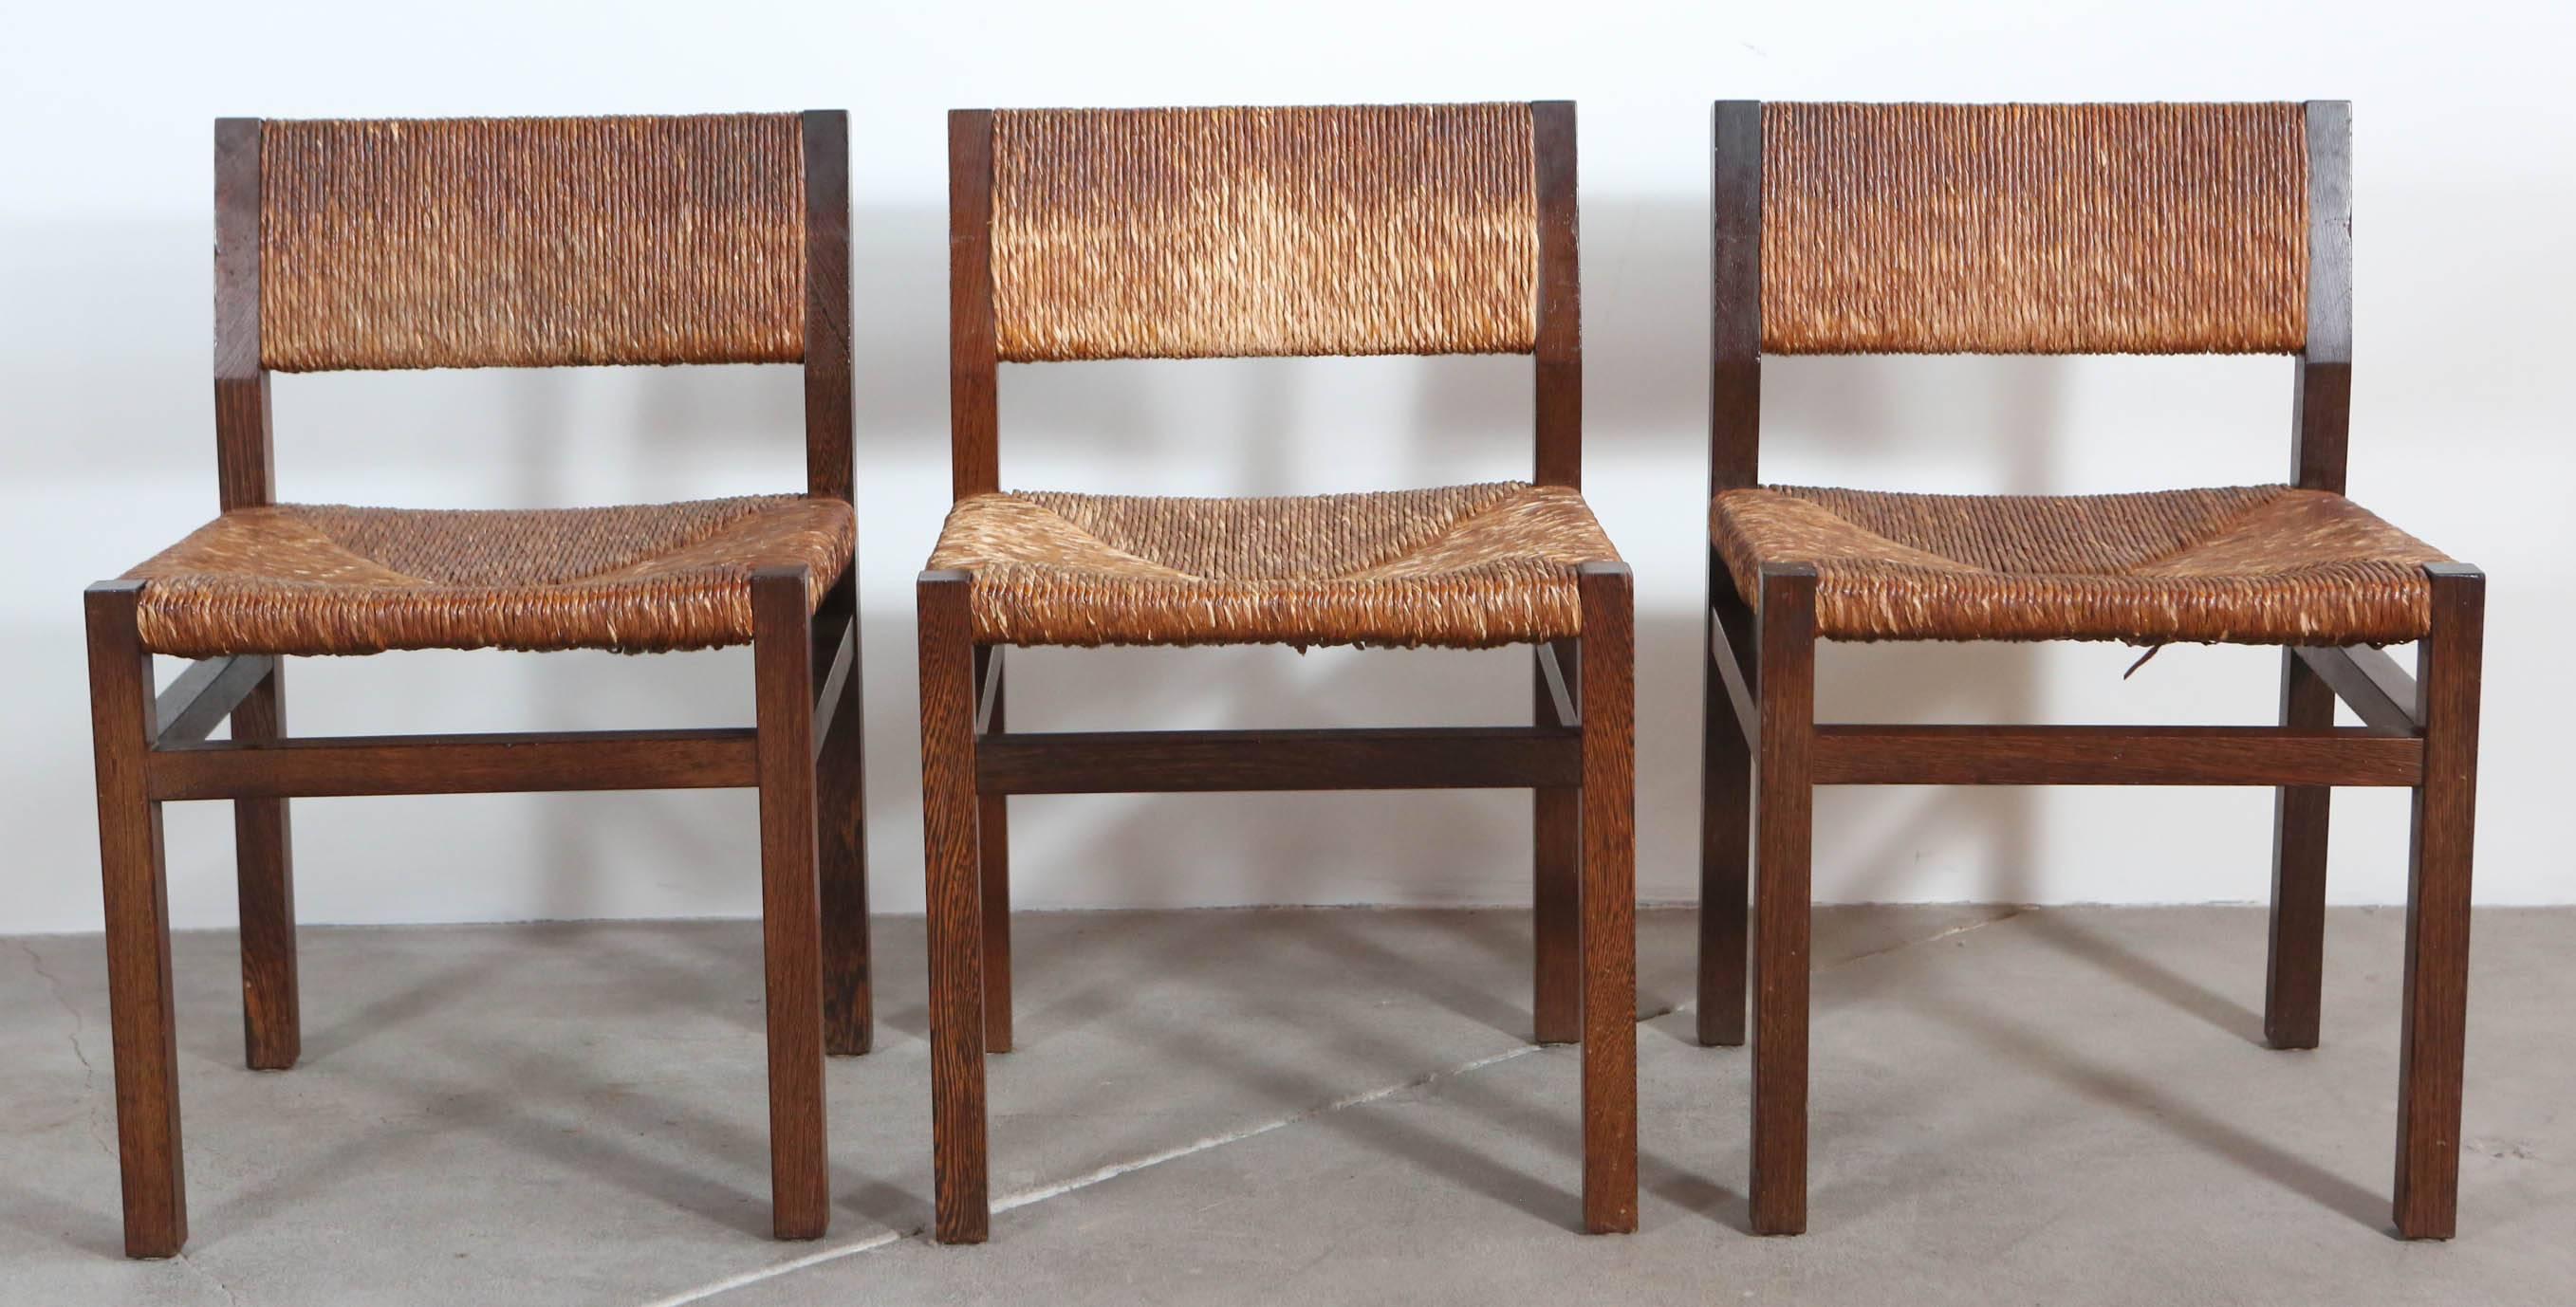 Set of Two armless dining chairs with rush seat and back with a dark oak frame.